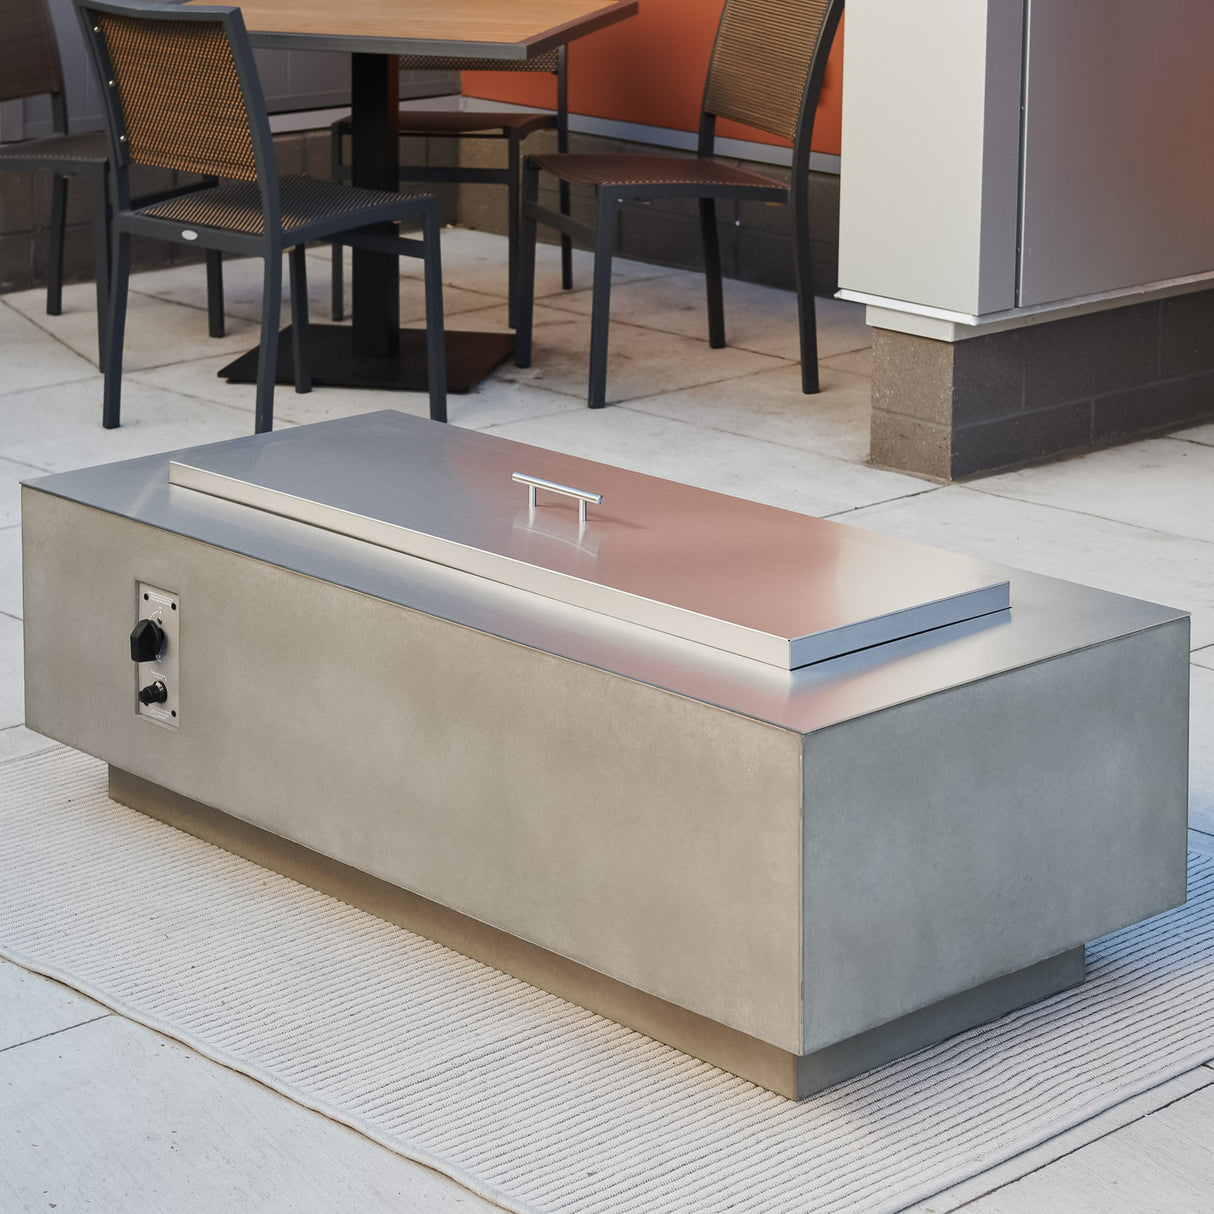 A Stainless Steel Overlay and Stainless Steel Burner Cover placed on a Natural Grey Cove Linear Gas Fire Pit Table 54"